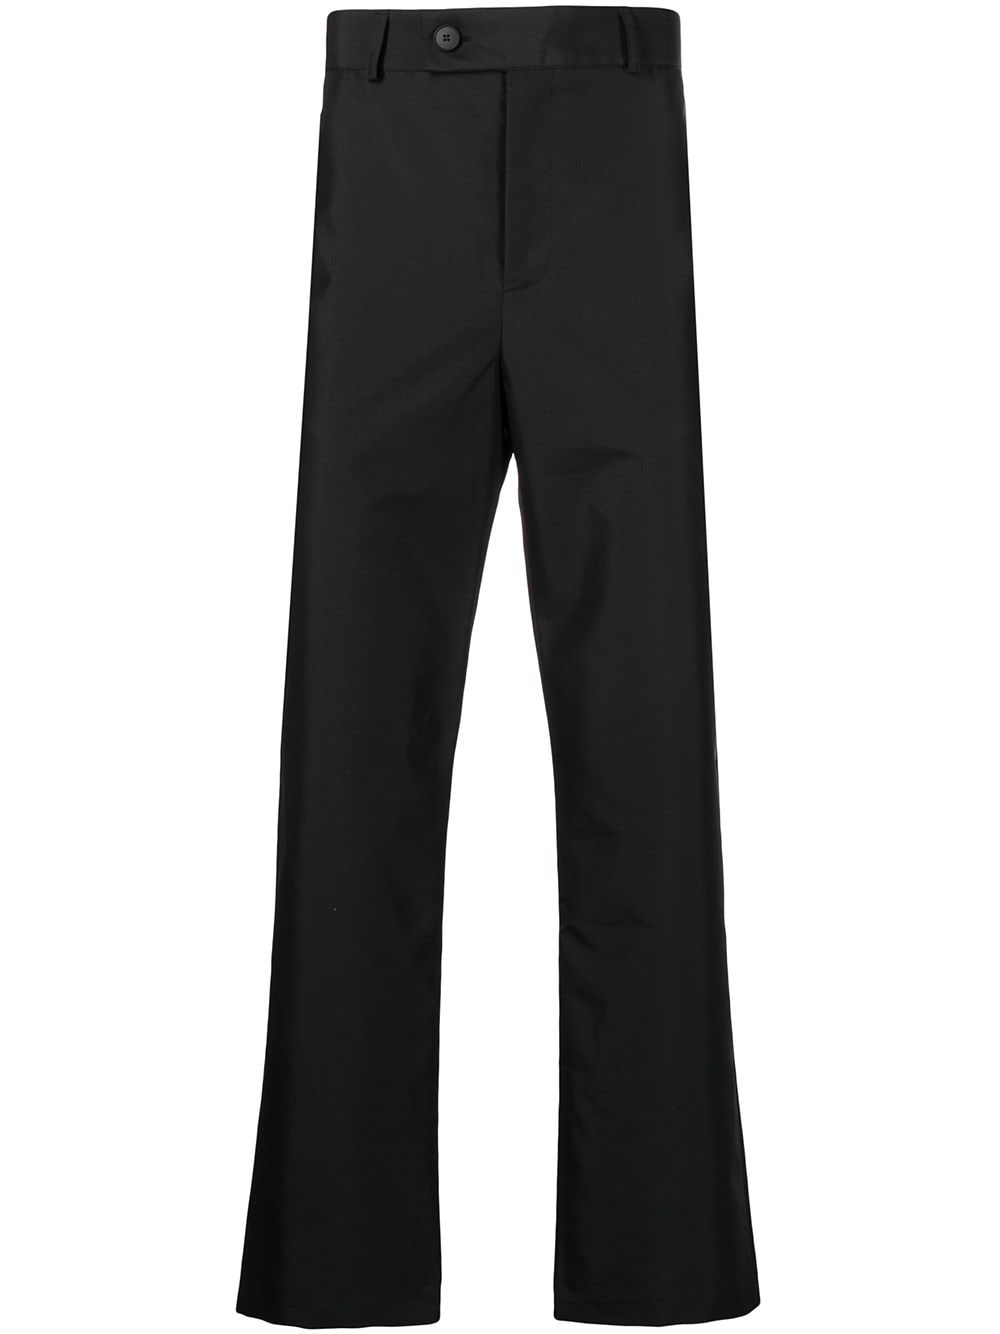 A-COLD-WALL* Crinkle tailored trousers - Black von A-COLD-WALL*